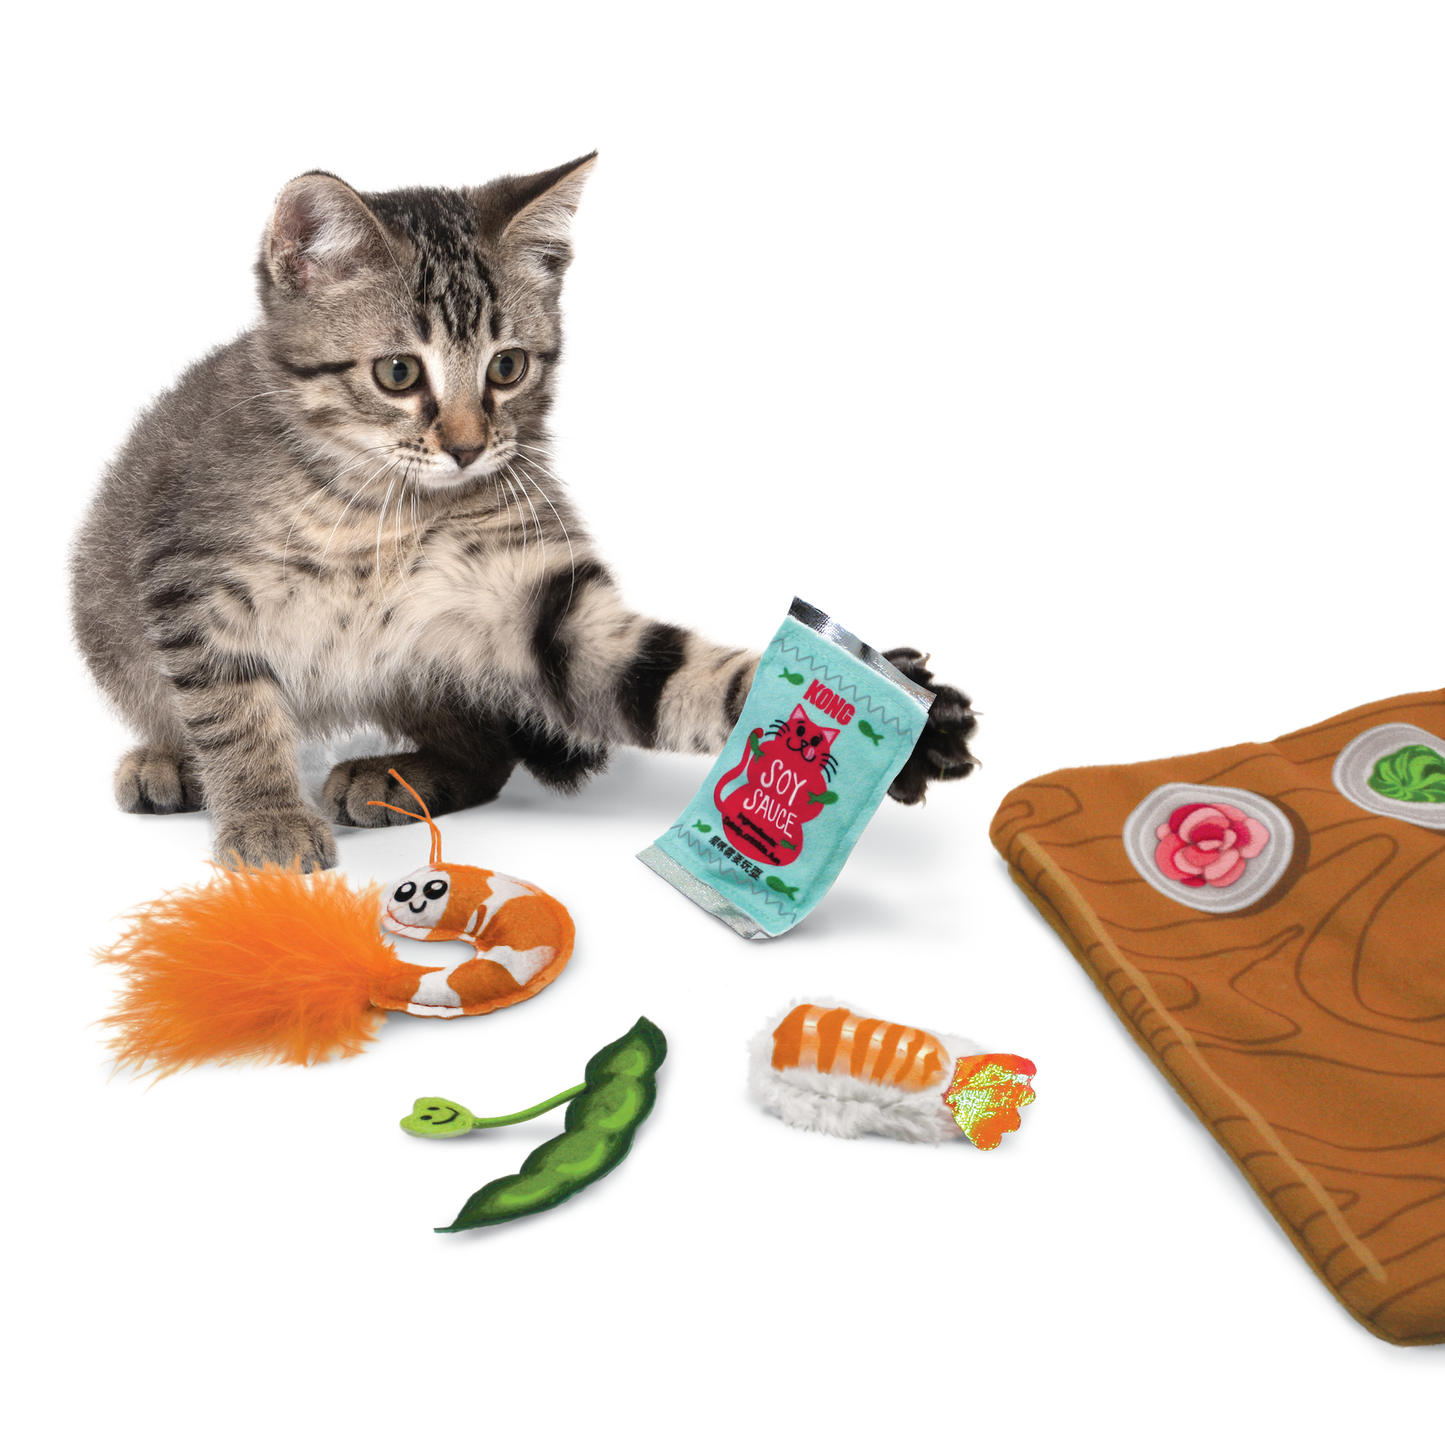 Kong - Cat Toys - Pull-a-Partz - Sushi